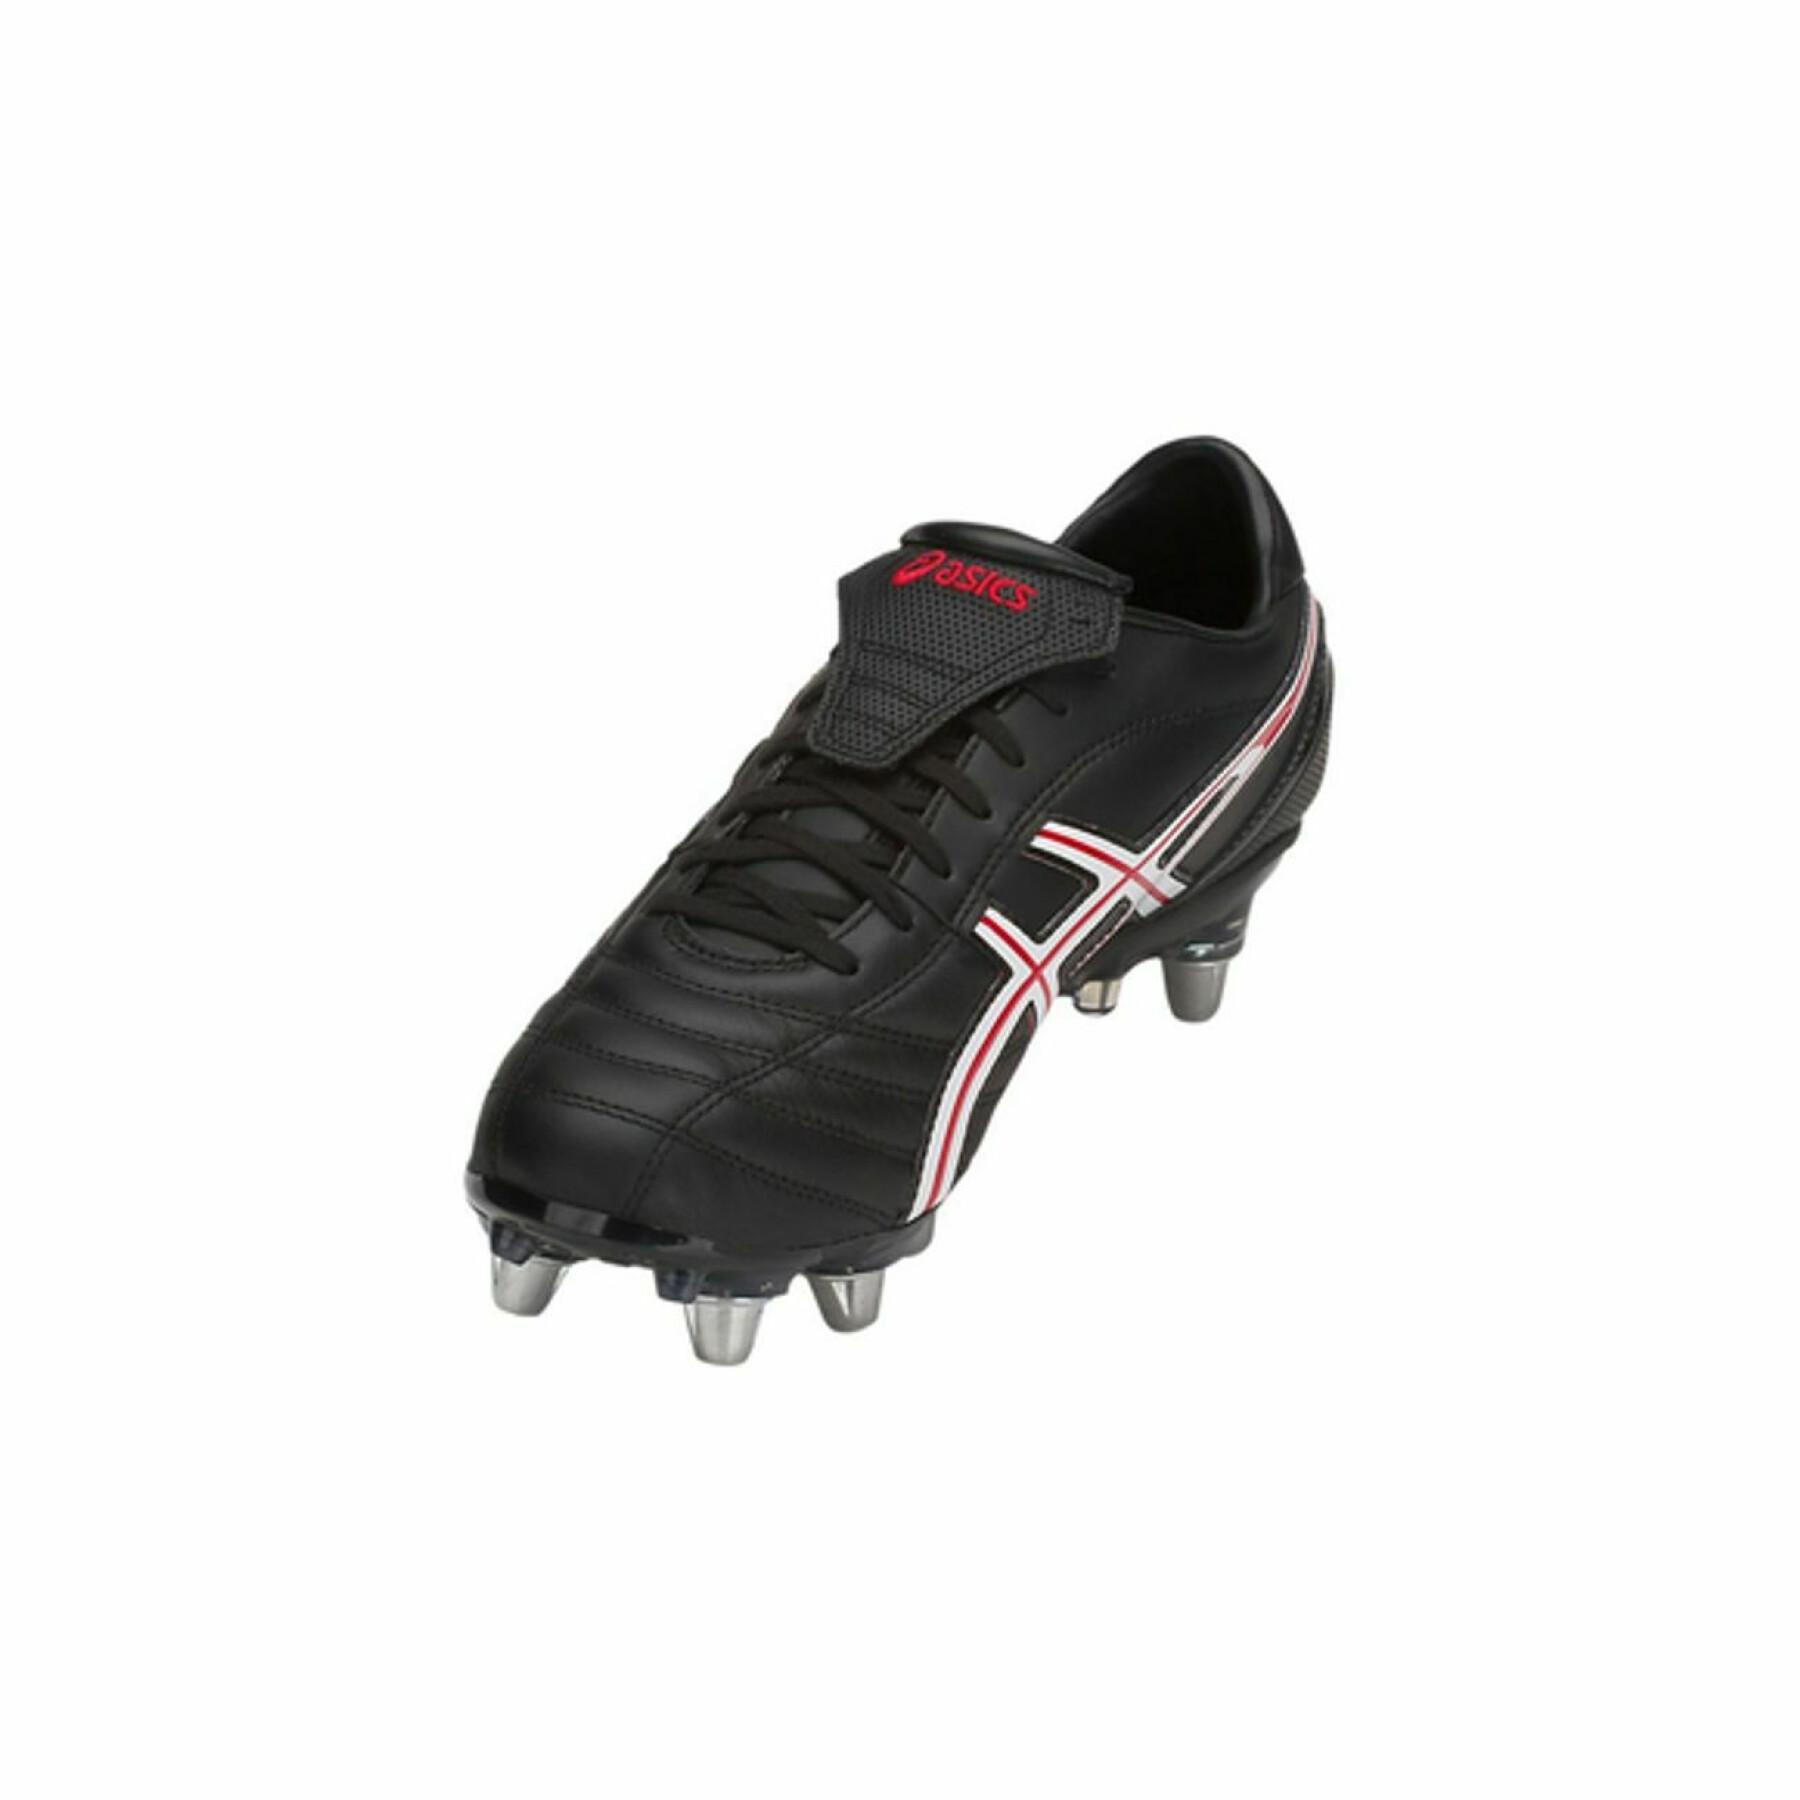 Rugby shoes Asics lethal warno st 2